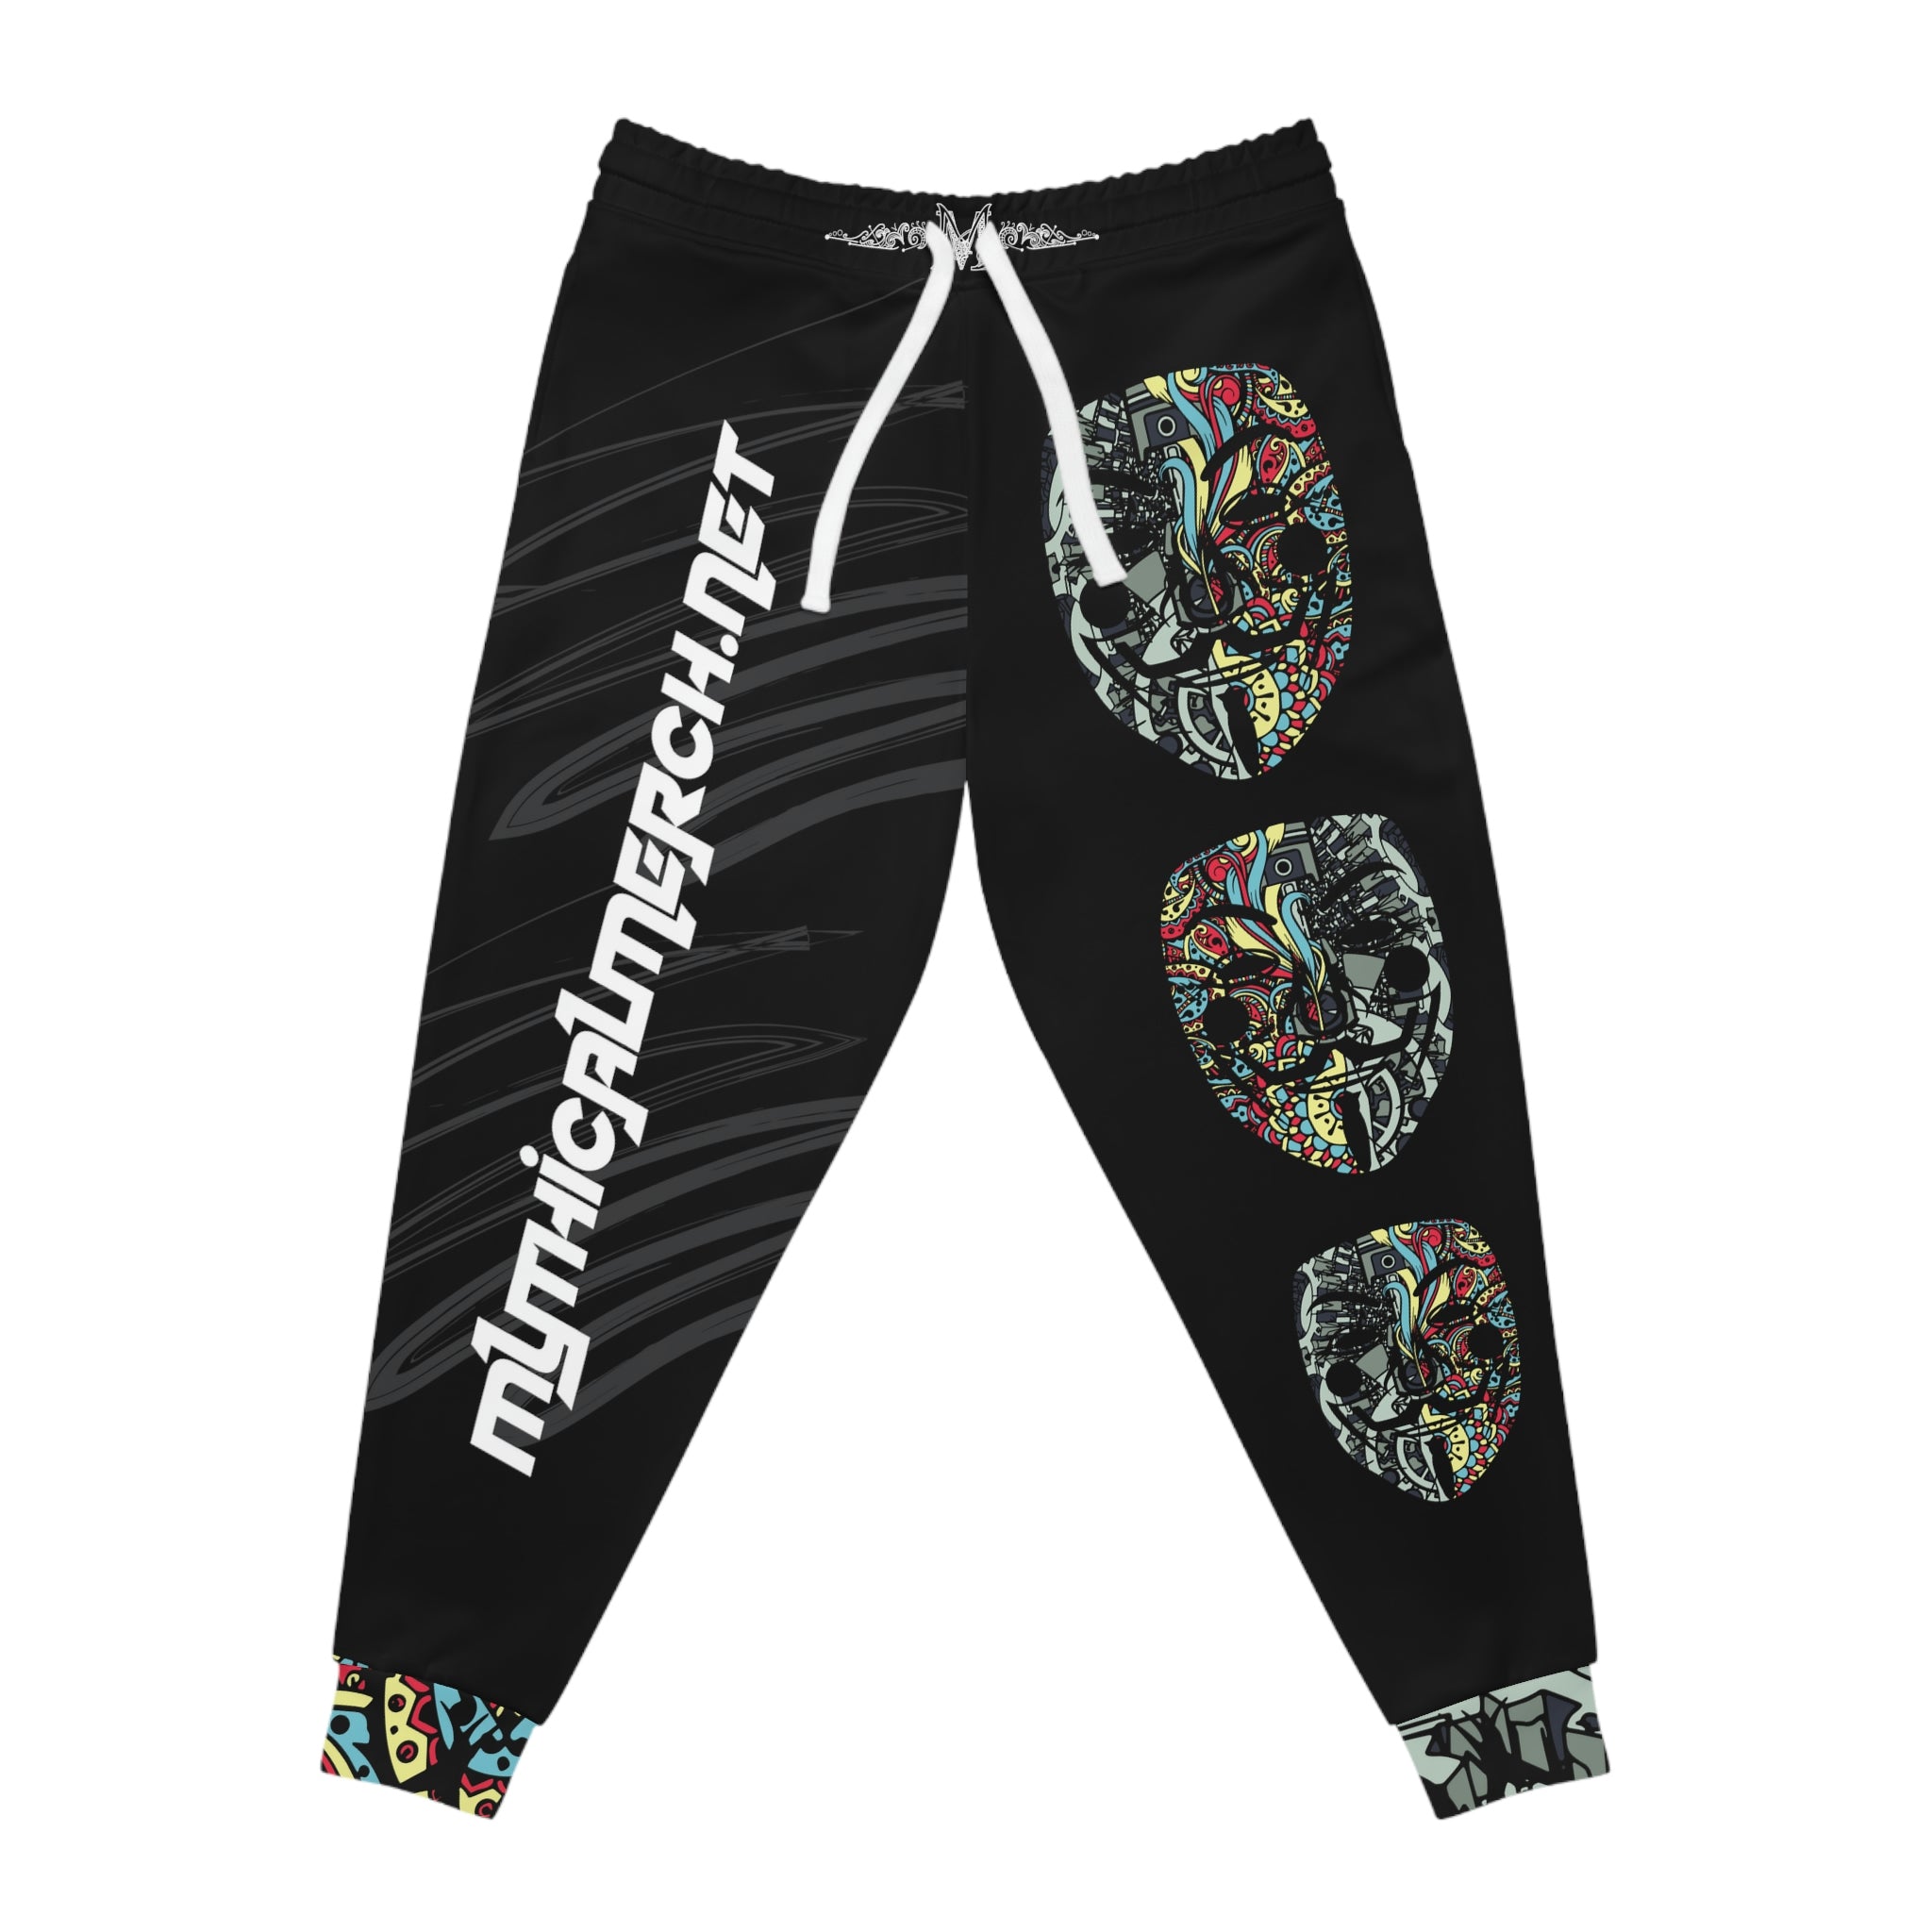 Fawkes Anonymous Nature Vs Machine Unisex Athletic Joggers Sweatpants Sweat Pants By Mike Snowadzky X Mythical Merch